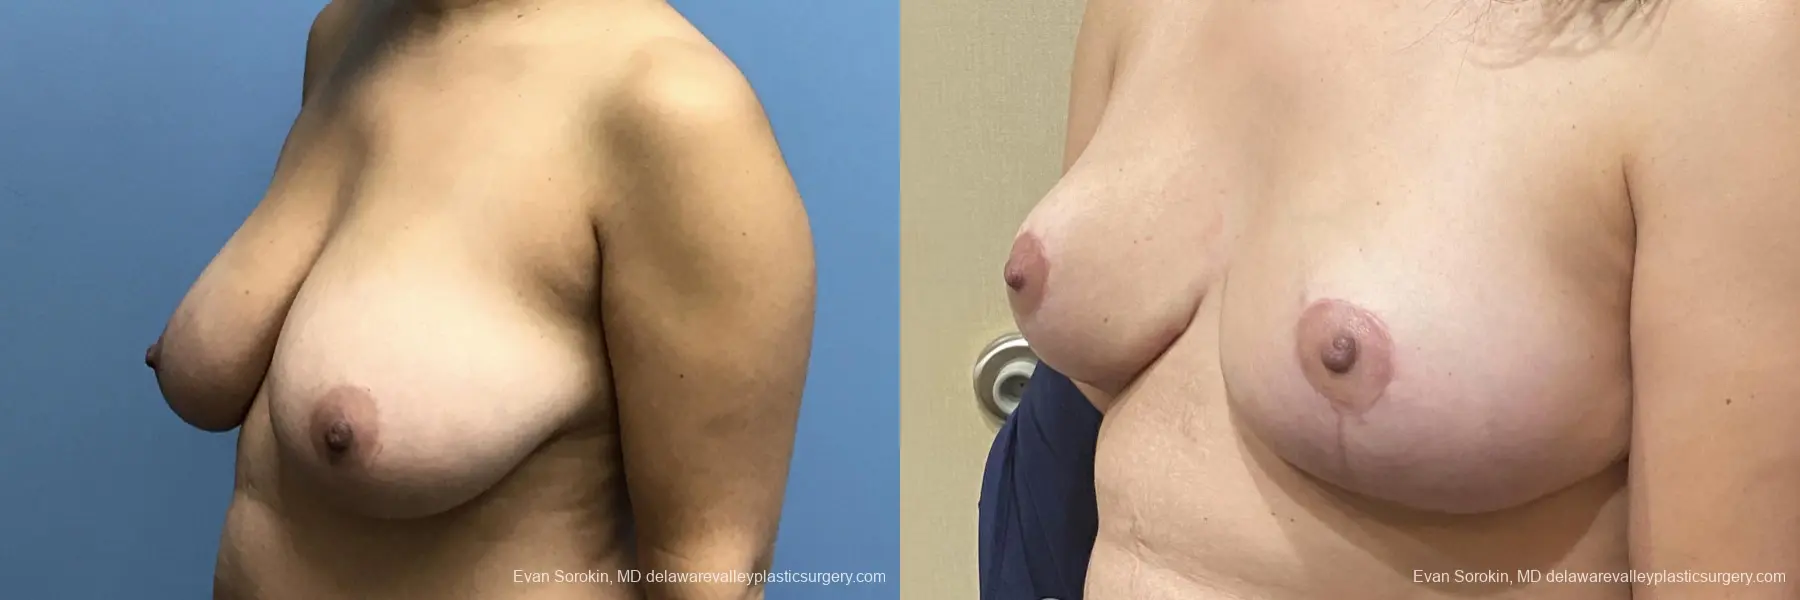 Breast Reduction: Patient 10 - Before and After 4